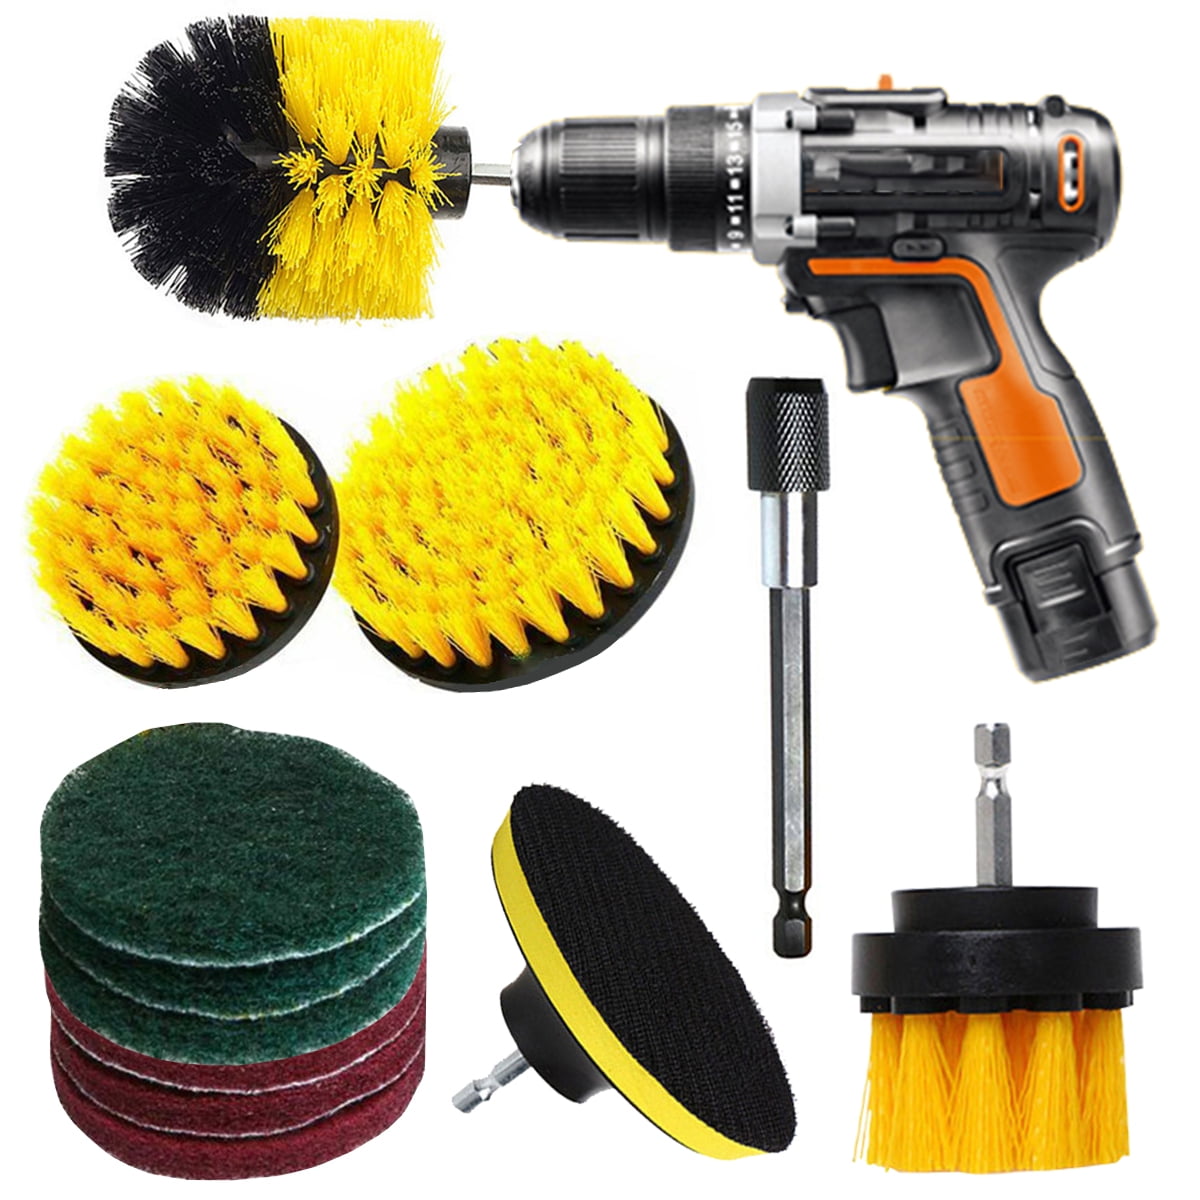 Corners Bathroom and Kitchen Surface Floor 4 Piece Drill Brush Power Scrubber Cleaning brush With 6 Inch Extender All Purpose Revolver rim Drill Scrub Brushes Kit for Grout Tub Tile Shower